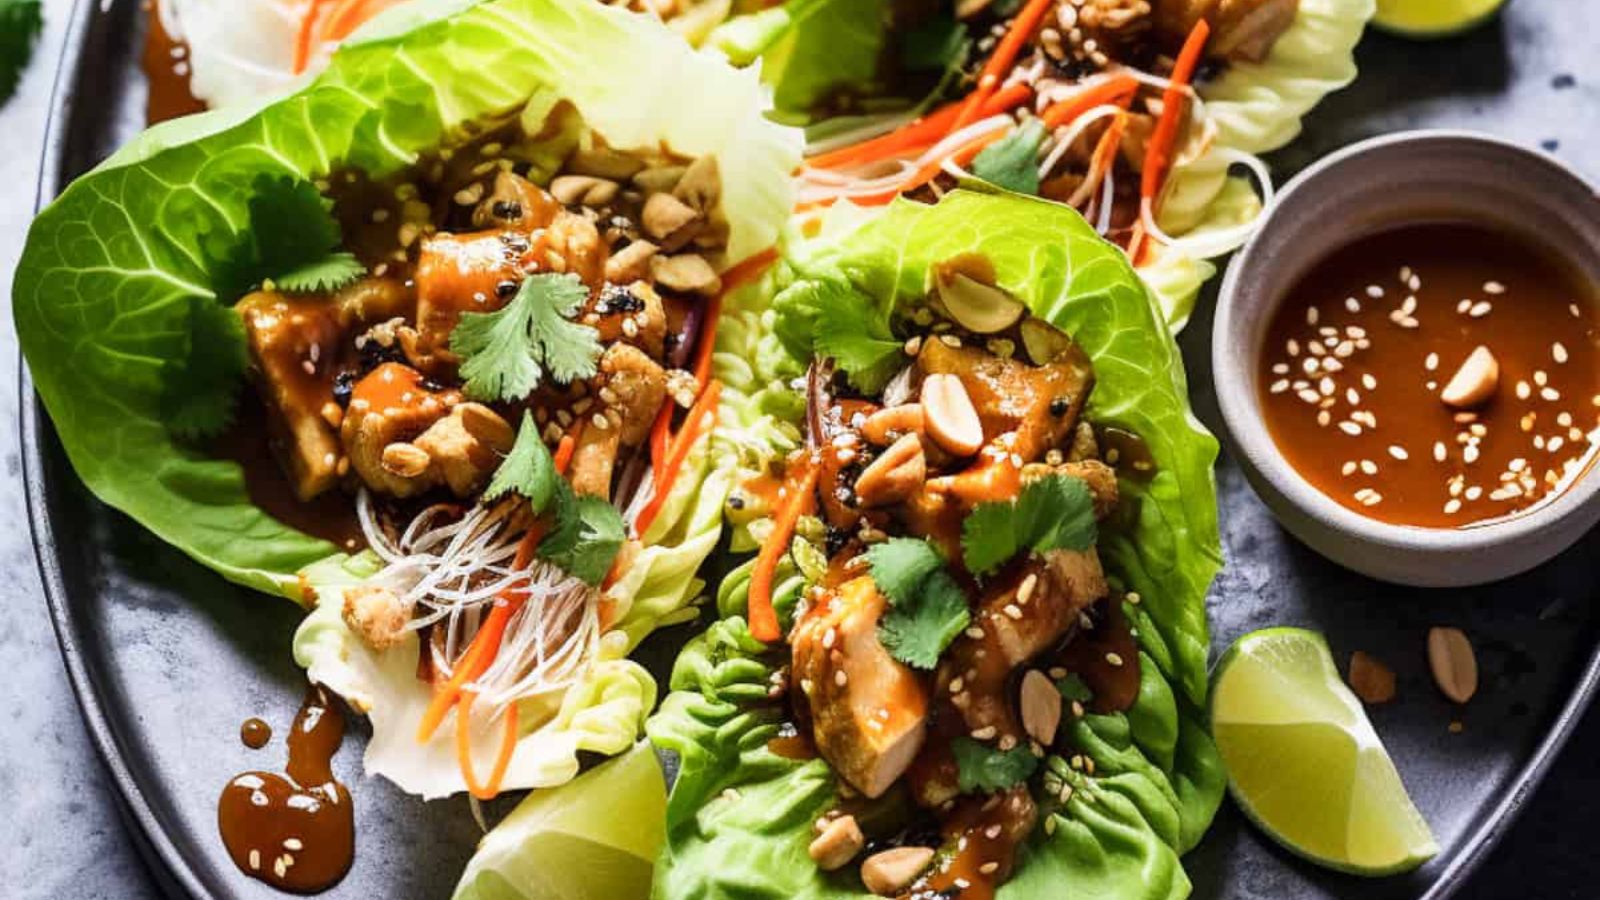 Expedite Home-Cooked Meals: 24 Fast Asian Recipes for Kitchen Victories